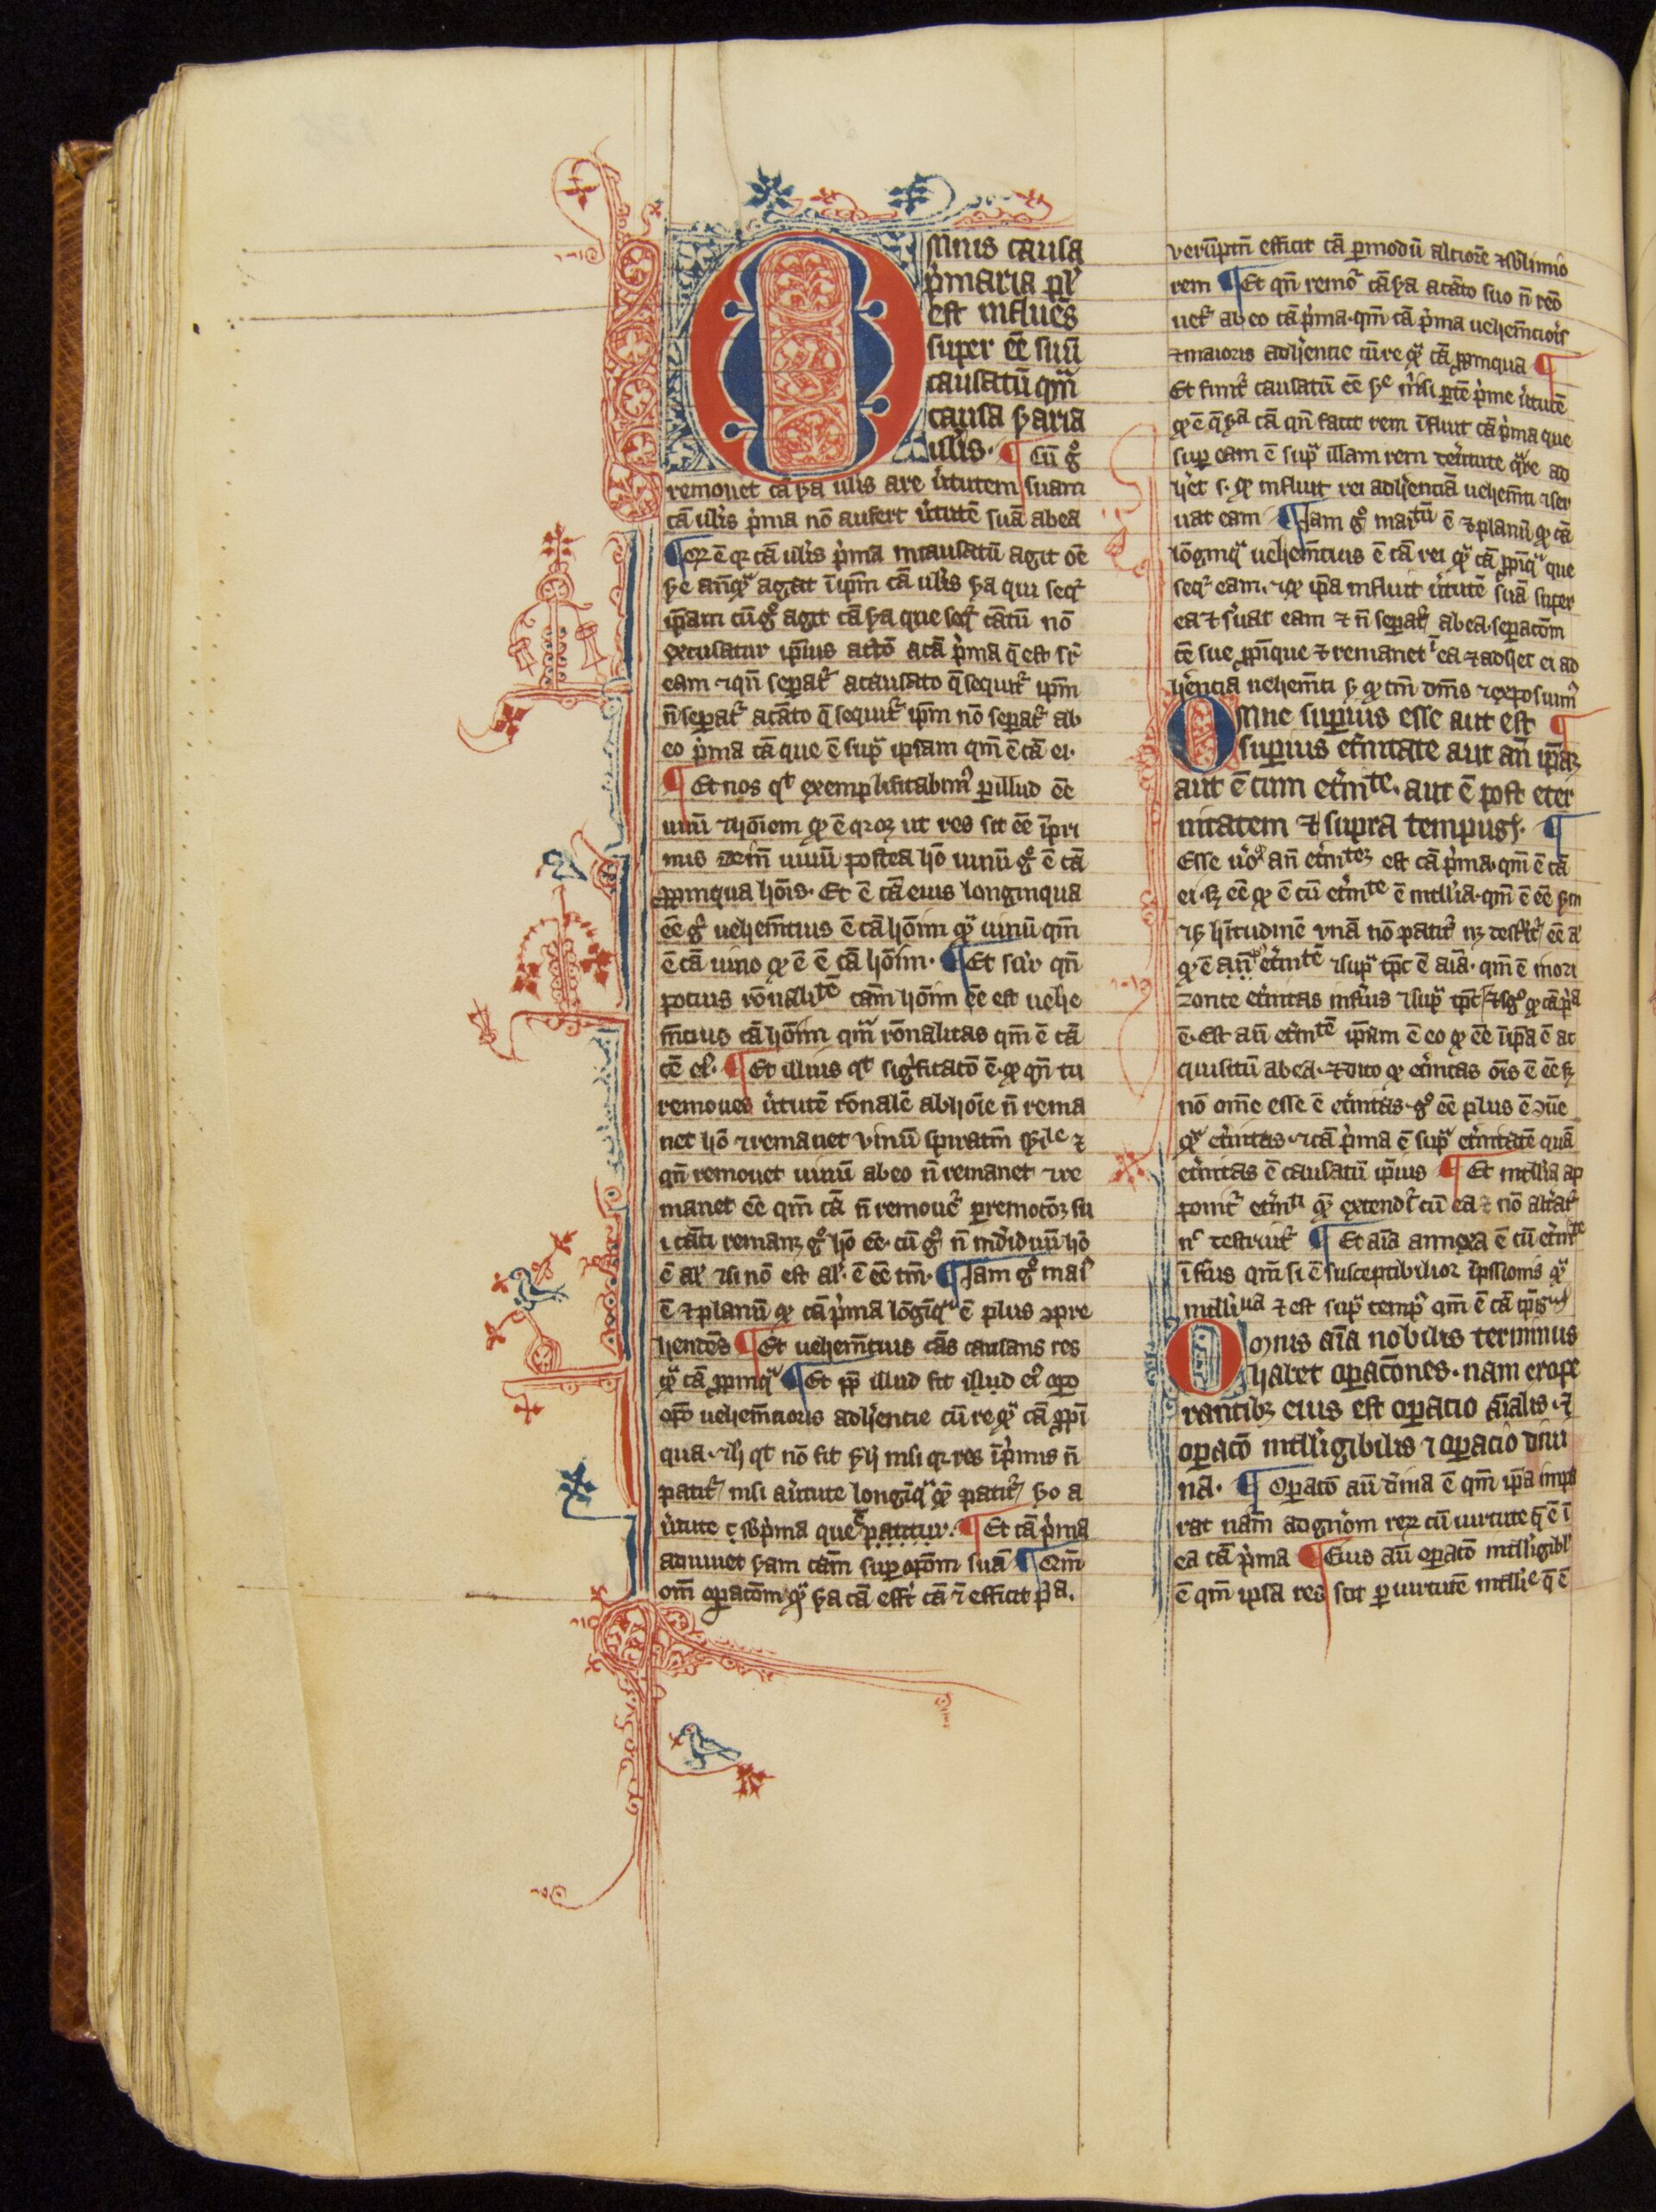 Left-hand page from a bound manuscript book with two columns of Latin text and visible guidelines. At the top of the left-hand column is a decorative capital. Parts of the text are decorated with a blue-and-red border.